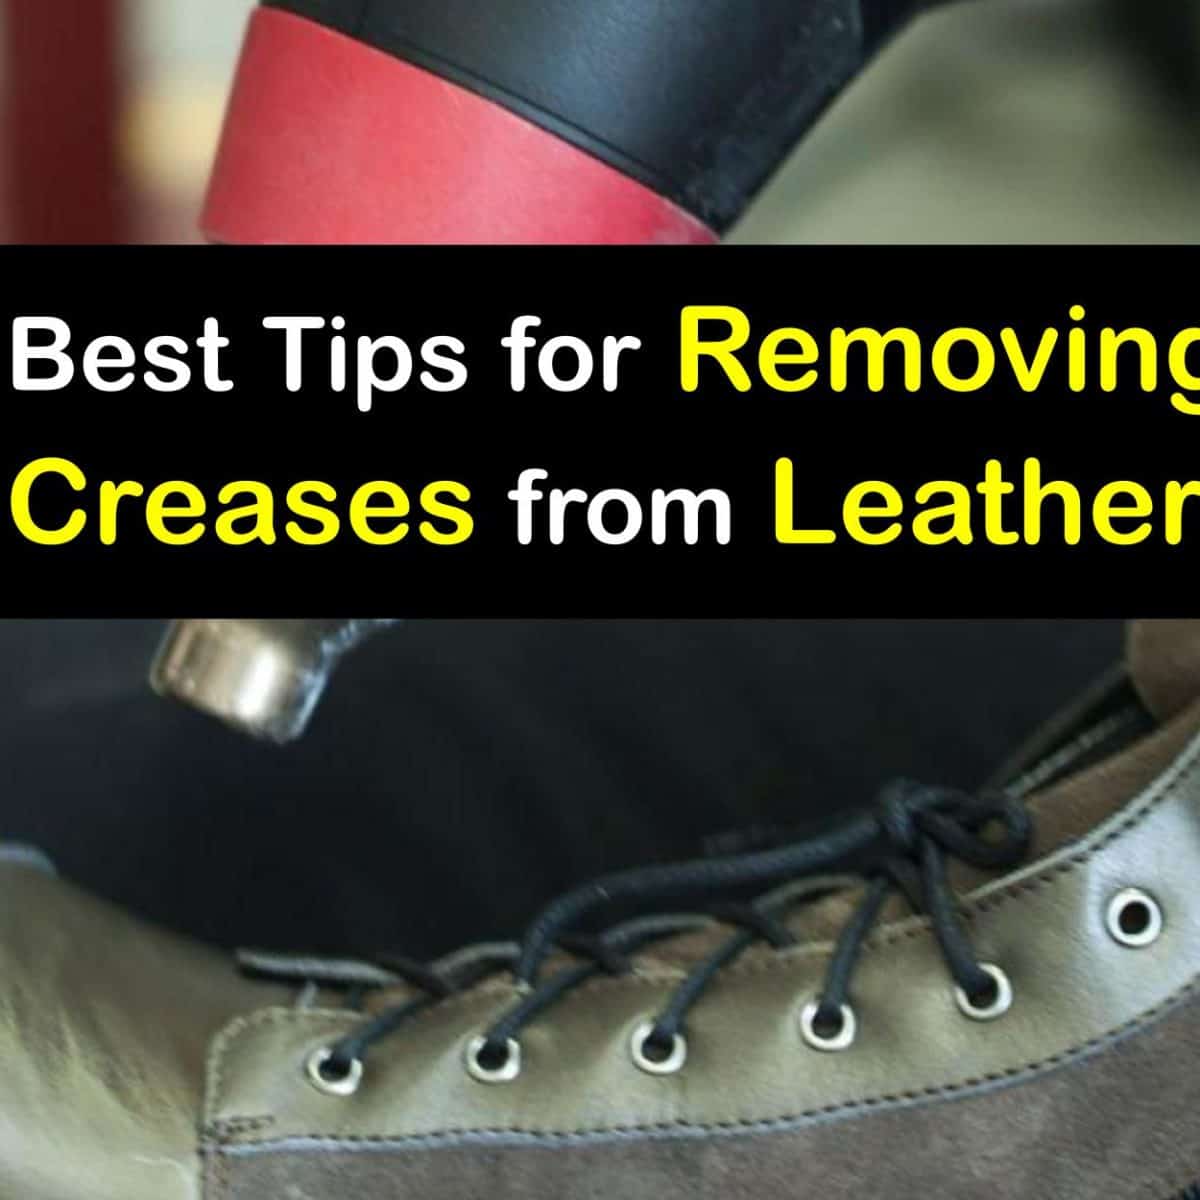 Get Rid of Shoe Creases - How to Remove Creases from Leather Shoes